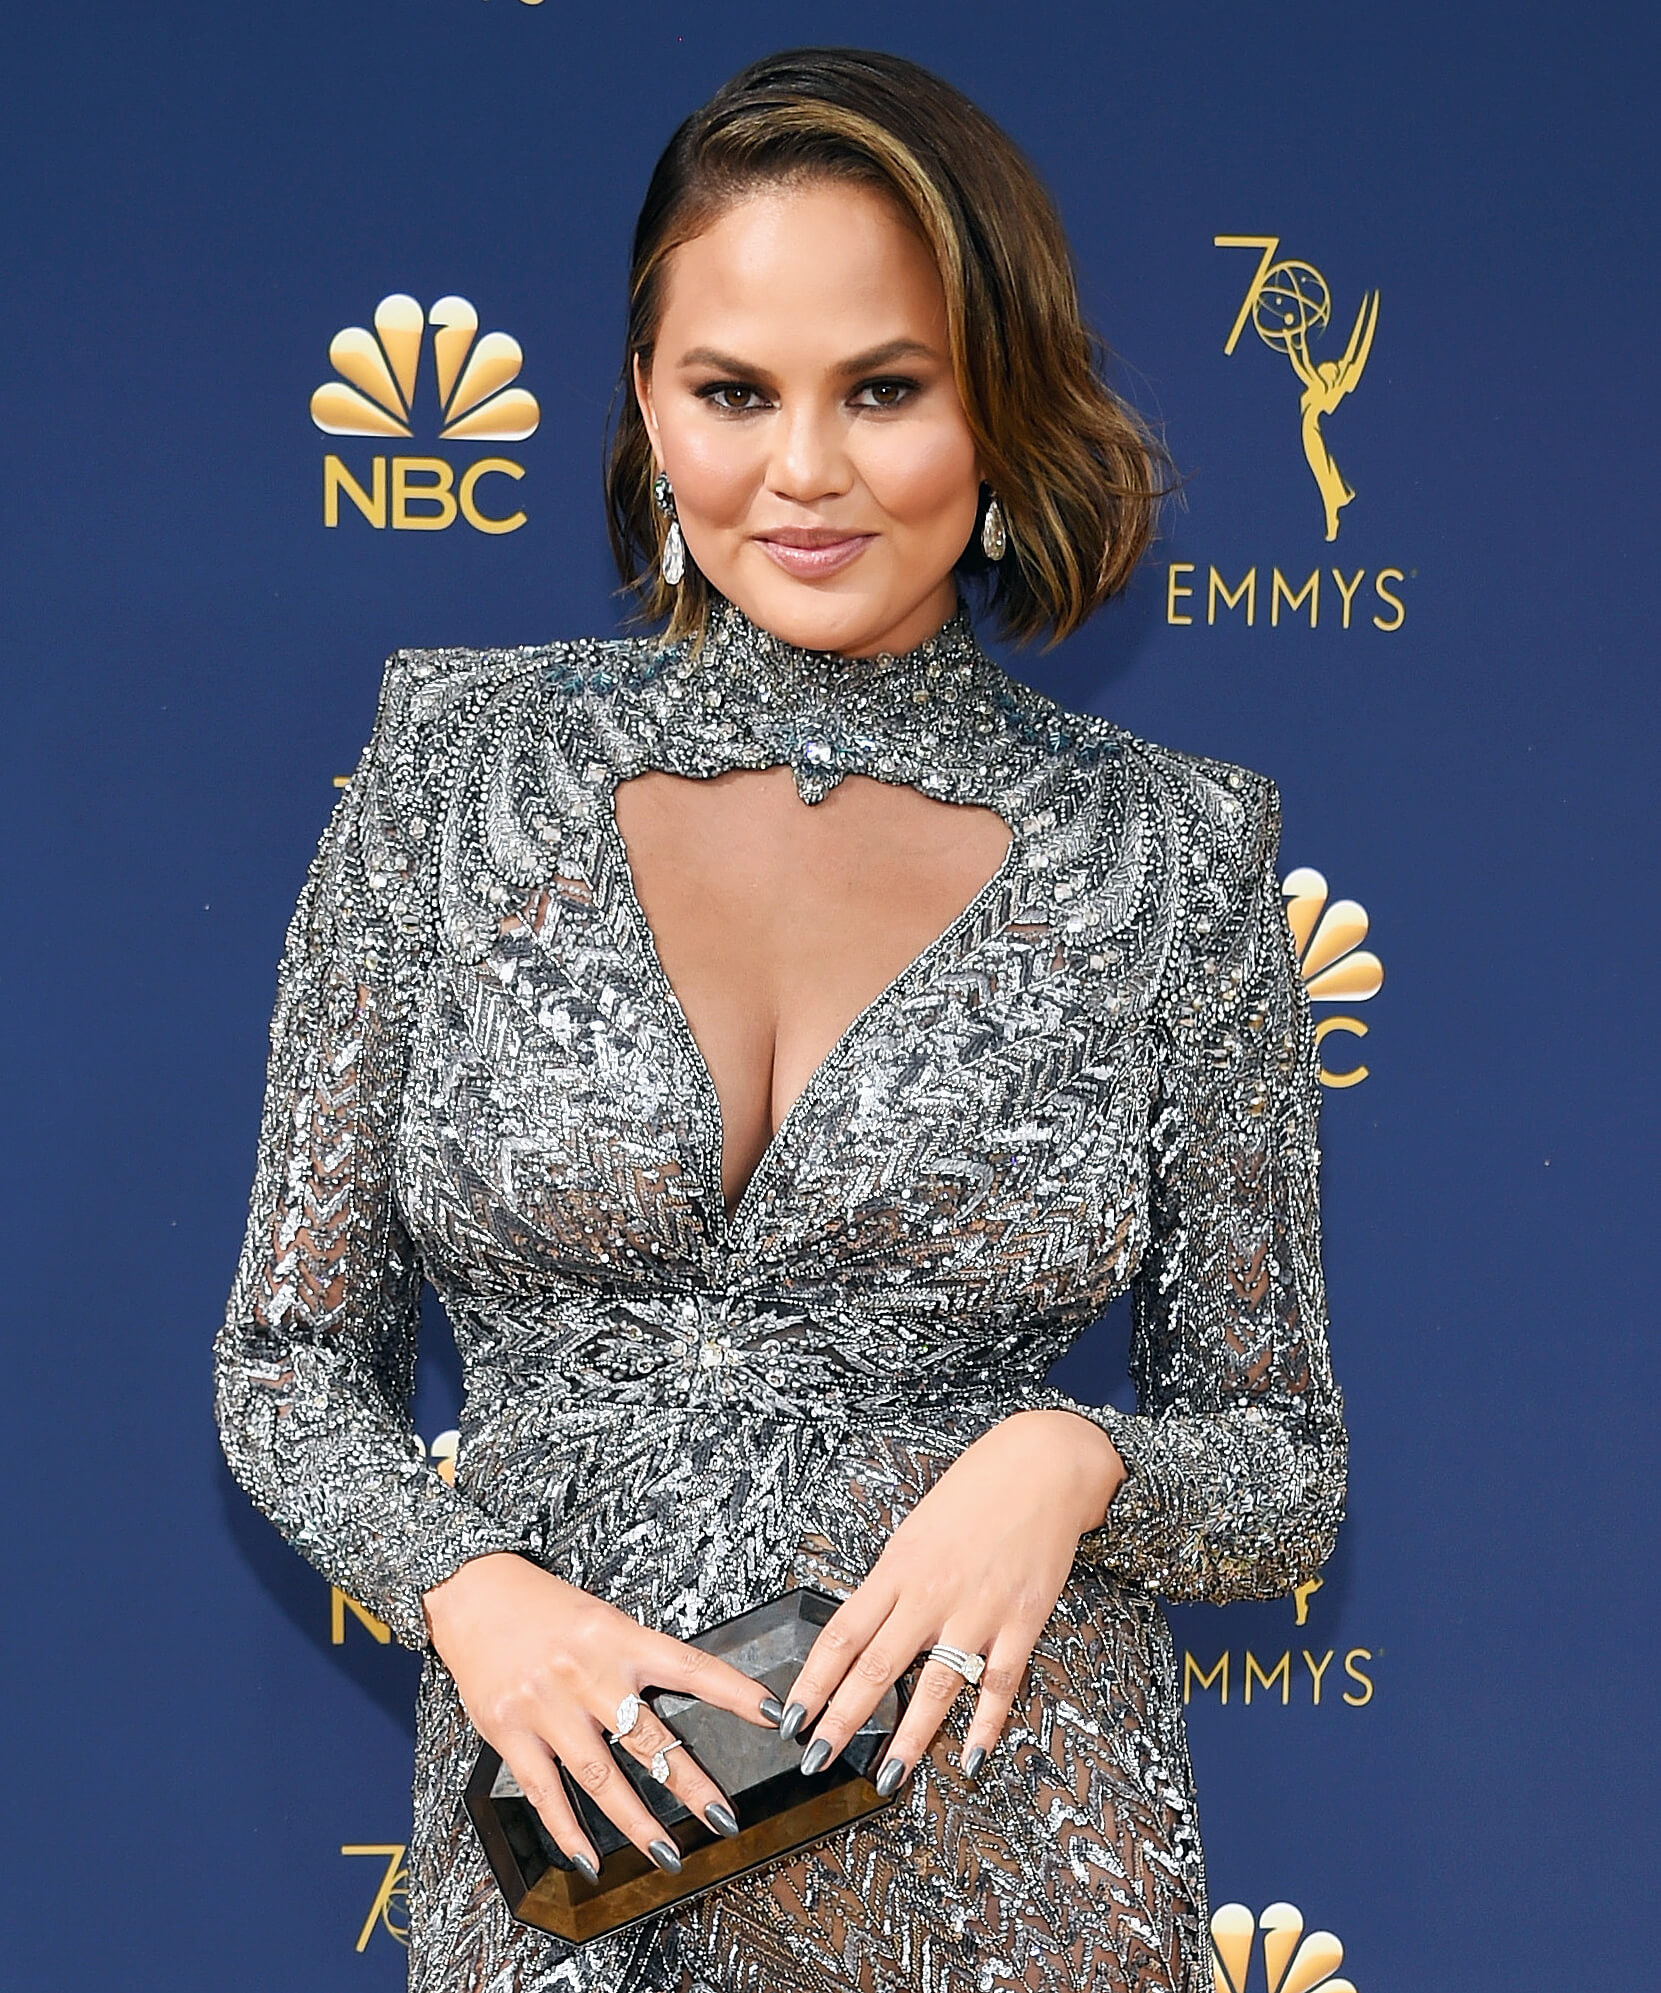 70+ Hottest Chrissy Teigen Pictures That Are Too Hot To Handle 2